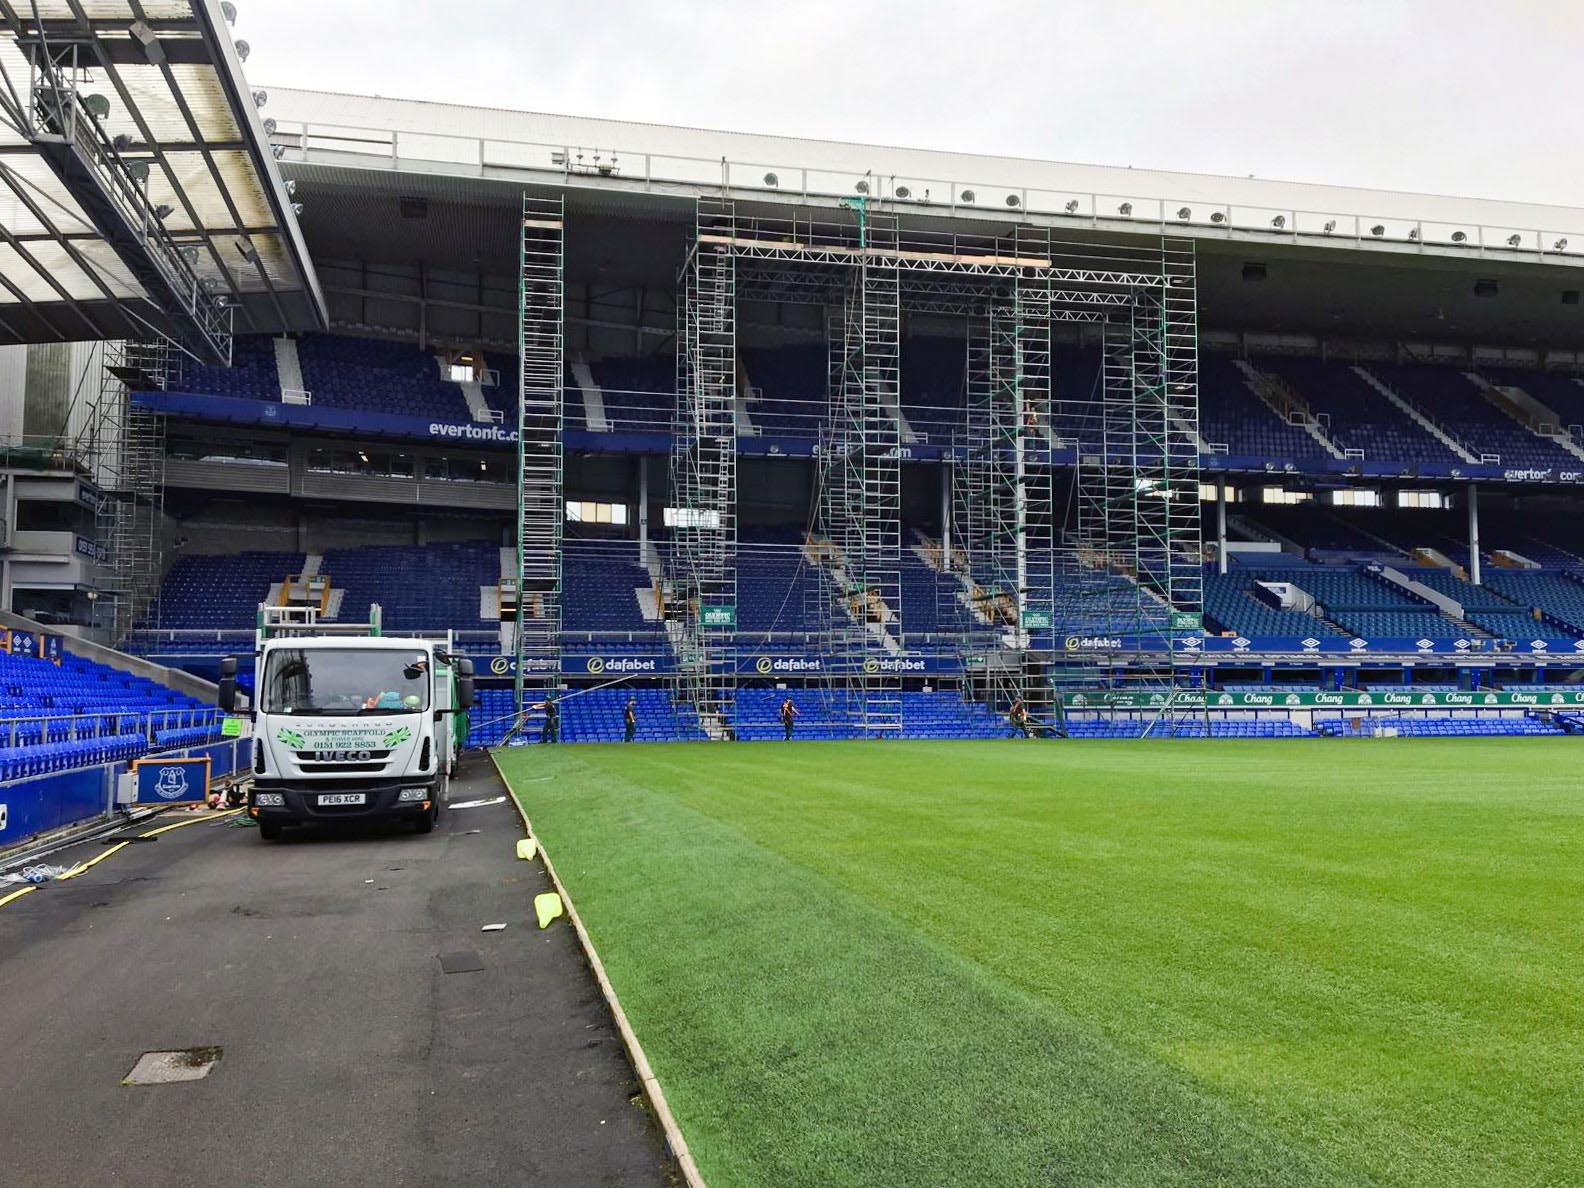 Several Alto HD towers used in a custom BS-1139 structure at Goodison Park.